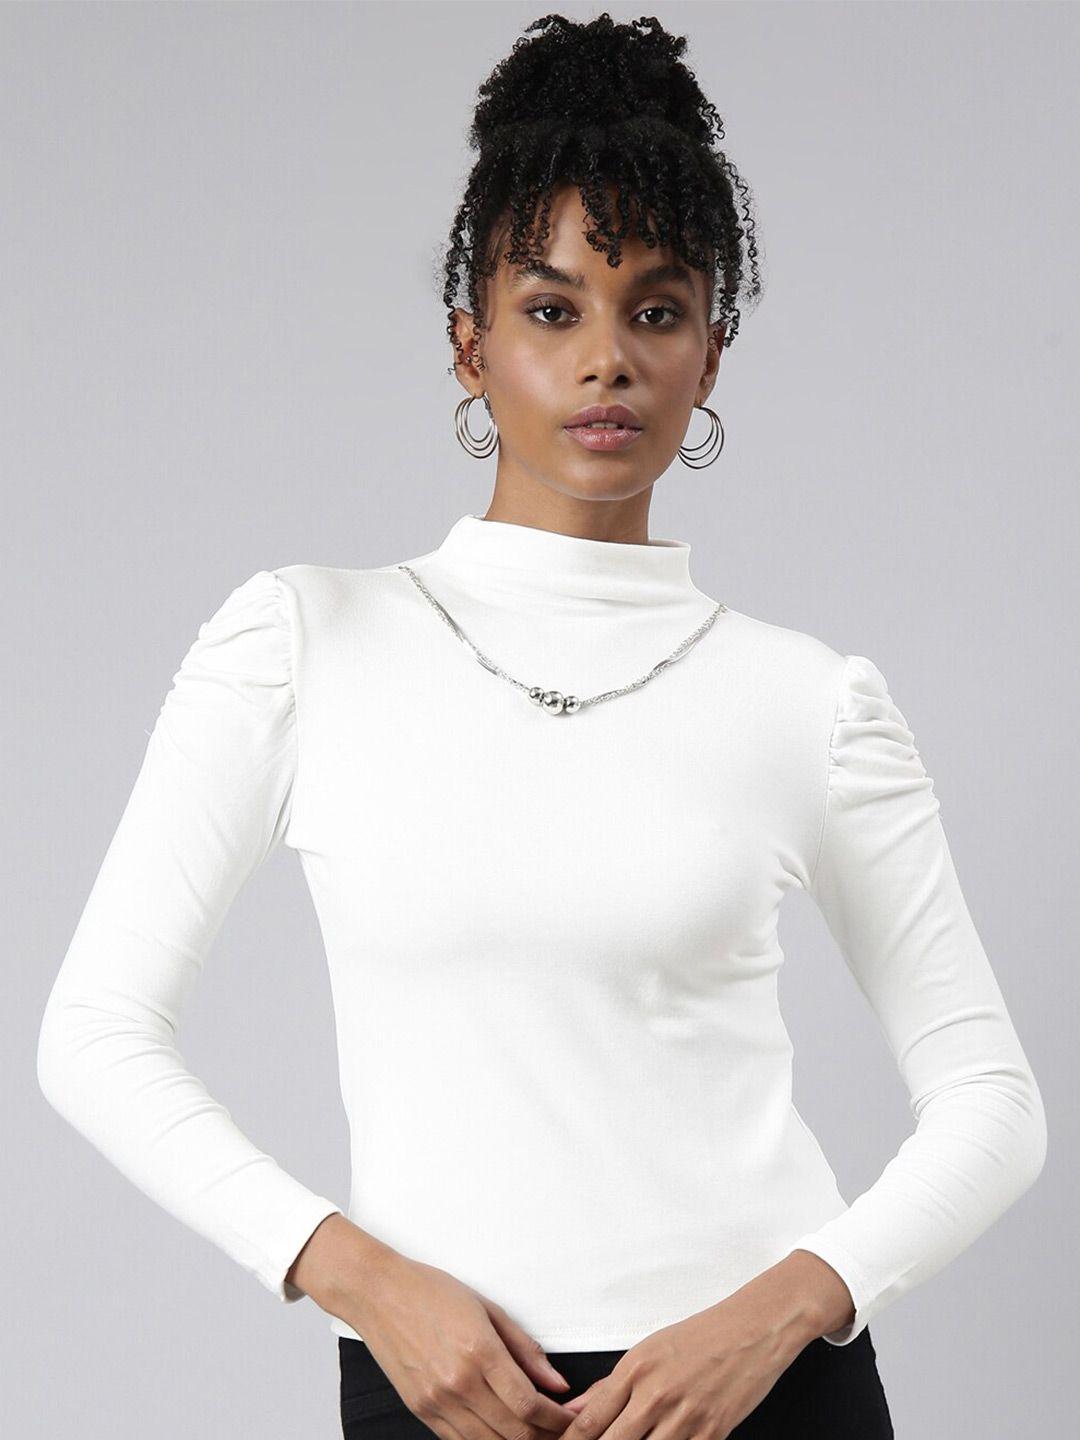 showoff high neck long sleeves top comes with chain